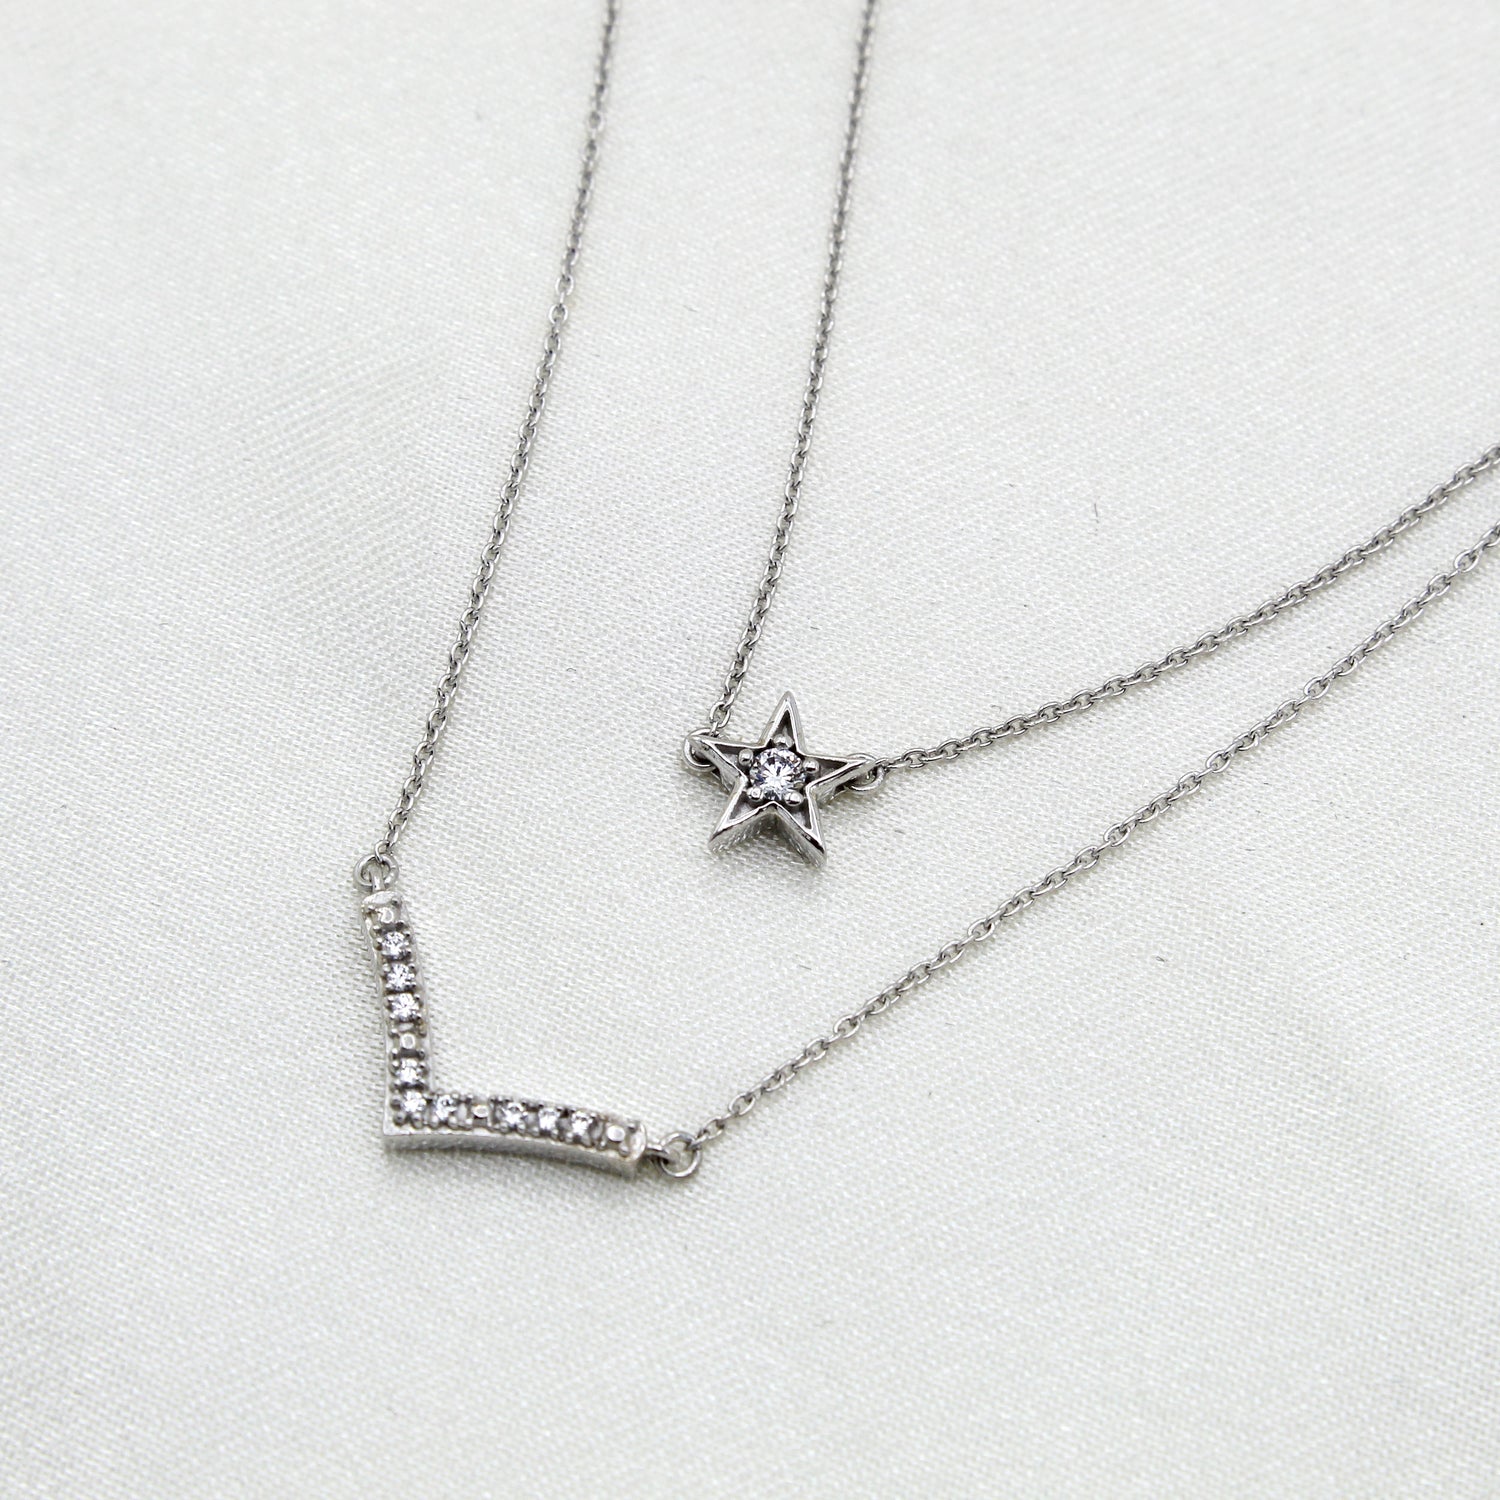 Star and Chevron Layered 1/10 Cttw Natural Diamond Pendant Necklace set in 925 Sterling Silver… jewelry